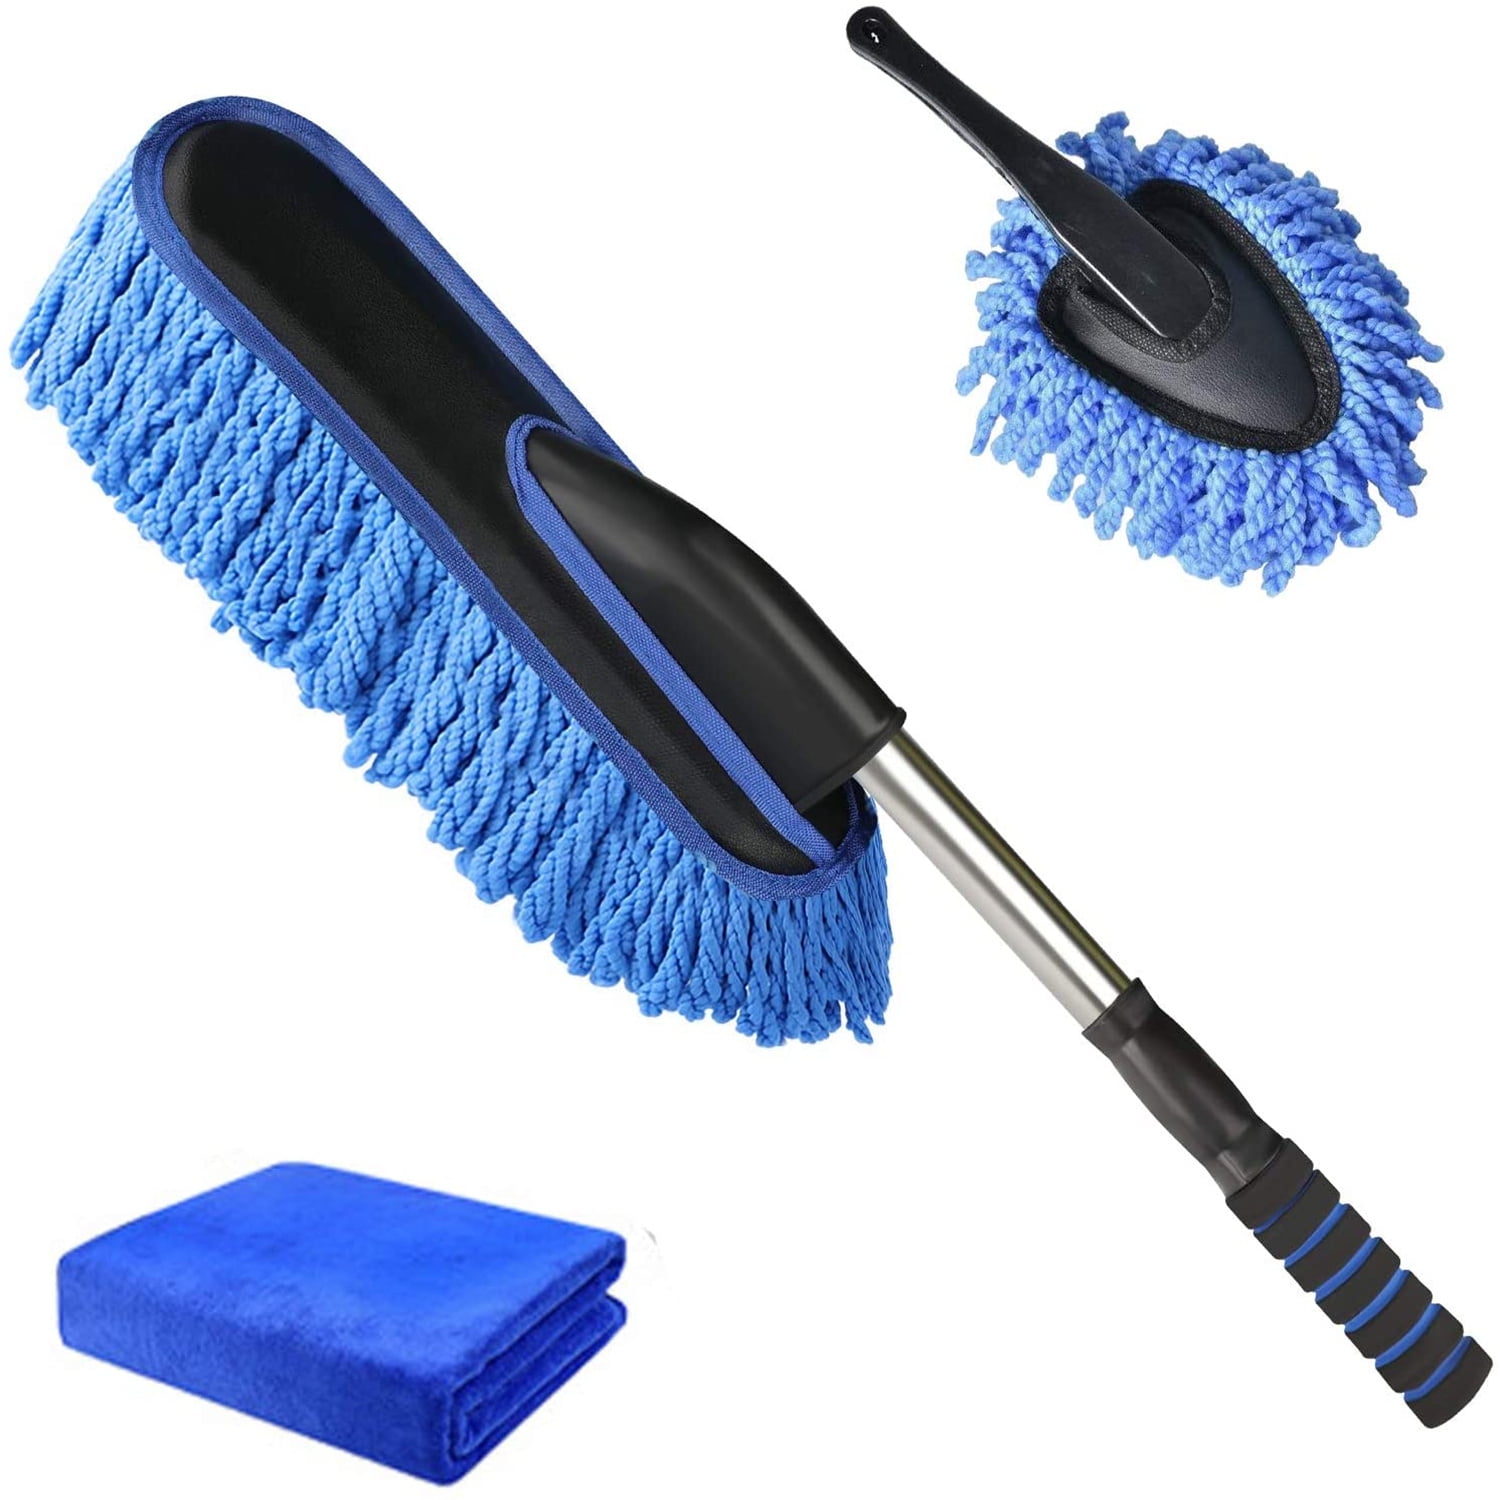 Lint Free-No-Scratch Dusting Remove Tool Blue X XINDELL Car Duster Brushes Set Effortlessly Removes Dust Pollen Daily Maintenance Dirt from Exterior & Interior for Easier Washing Waxing